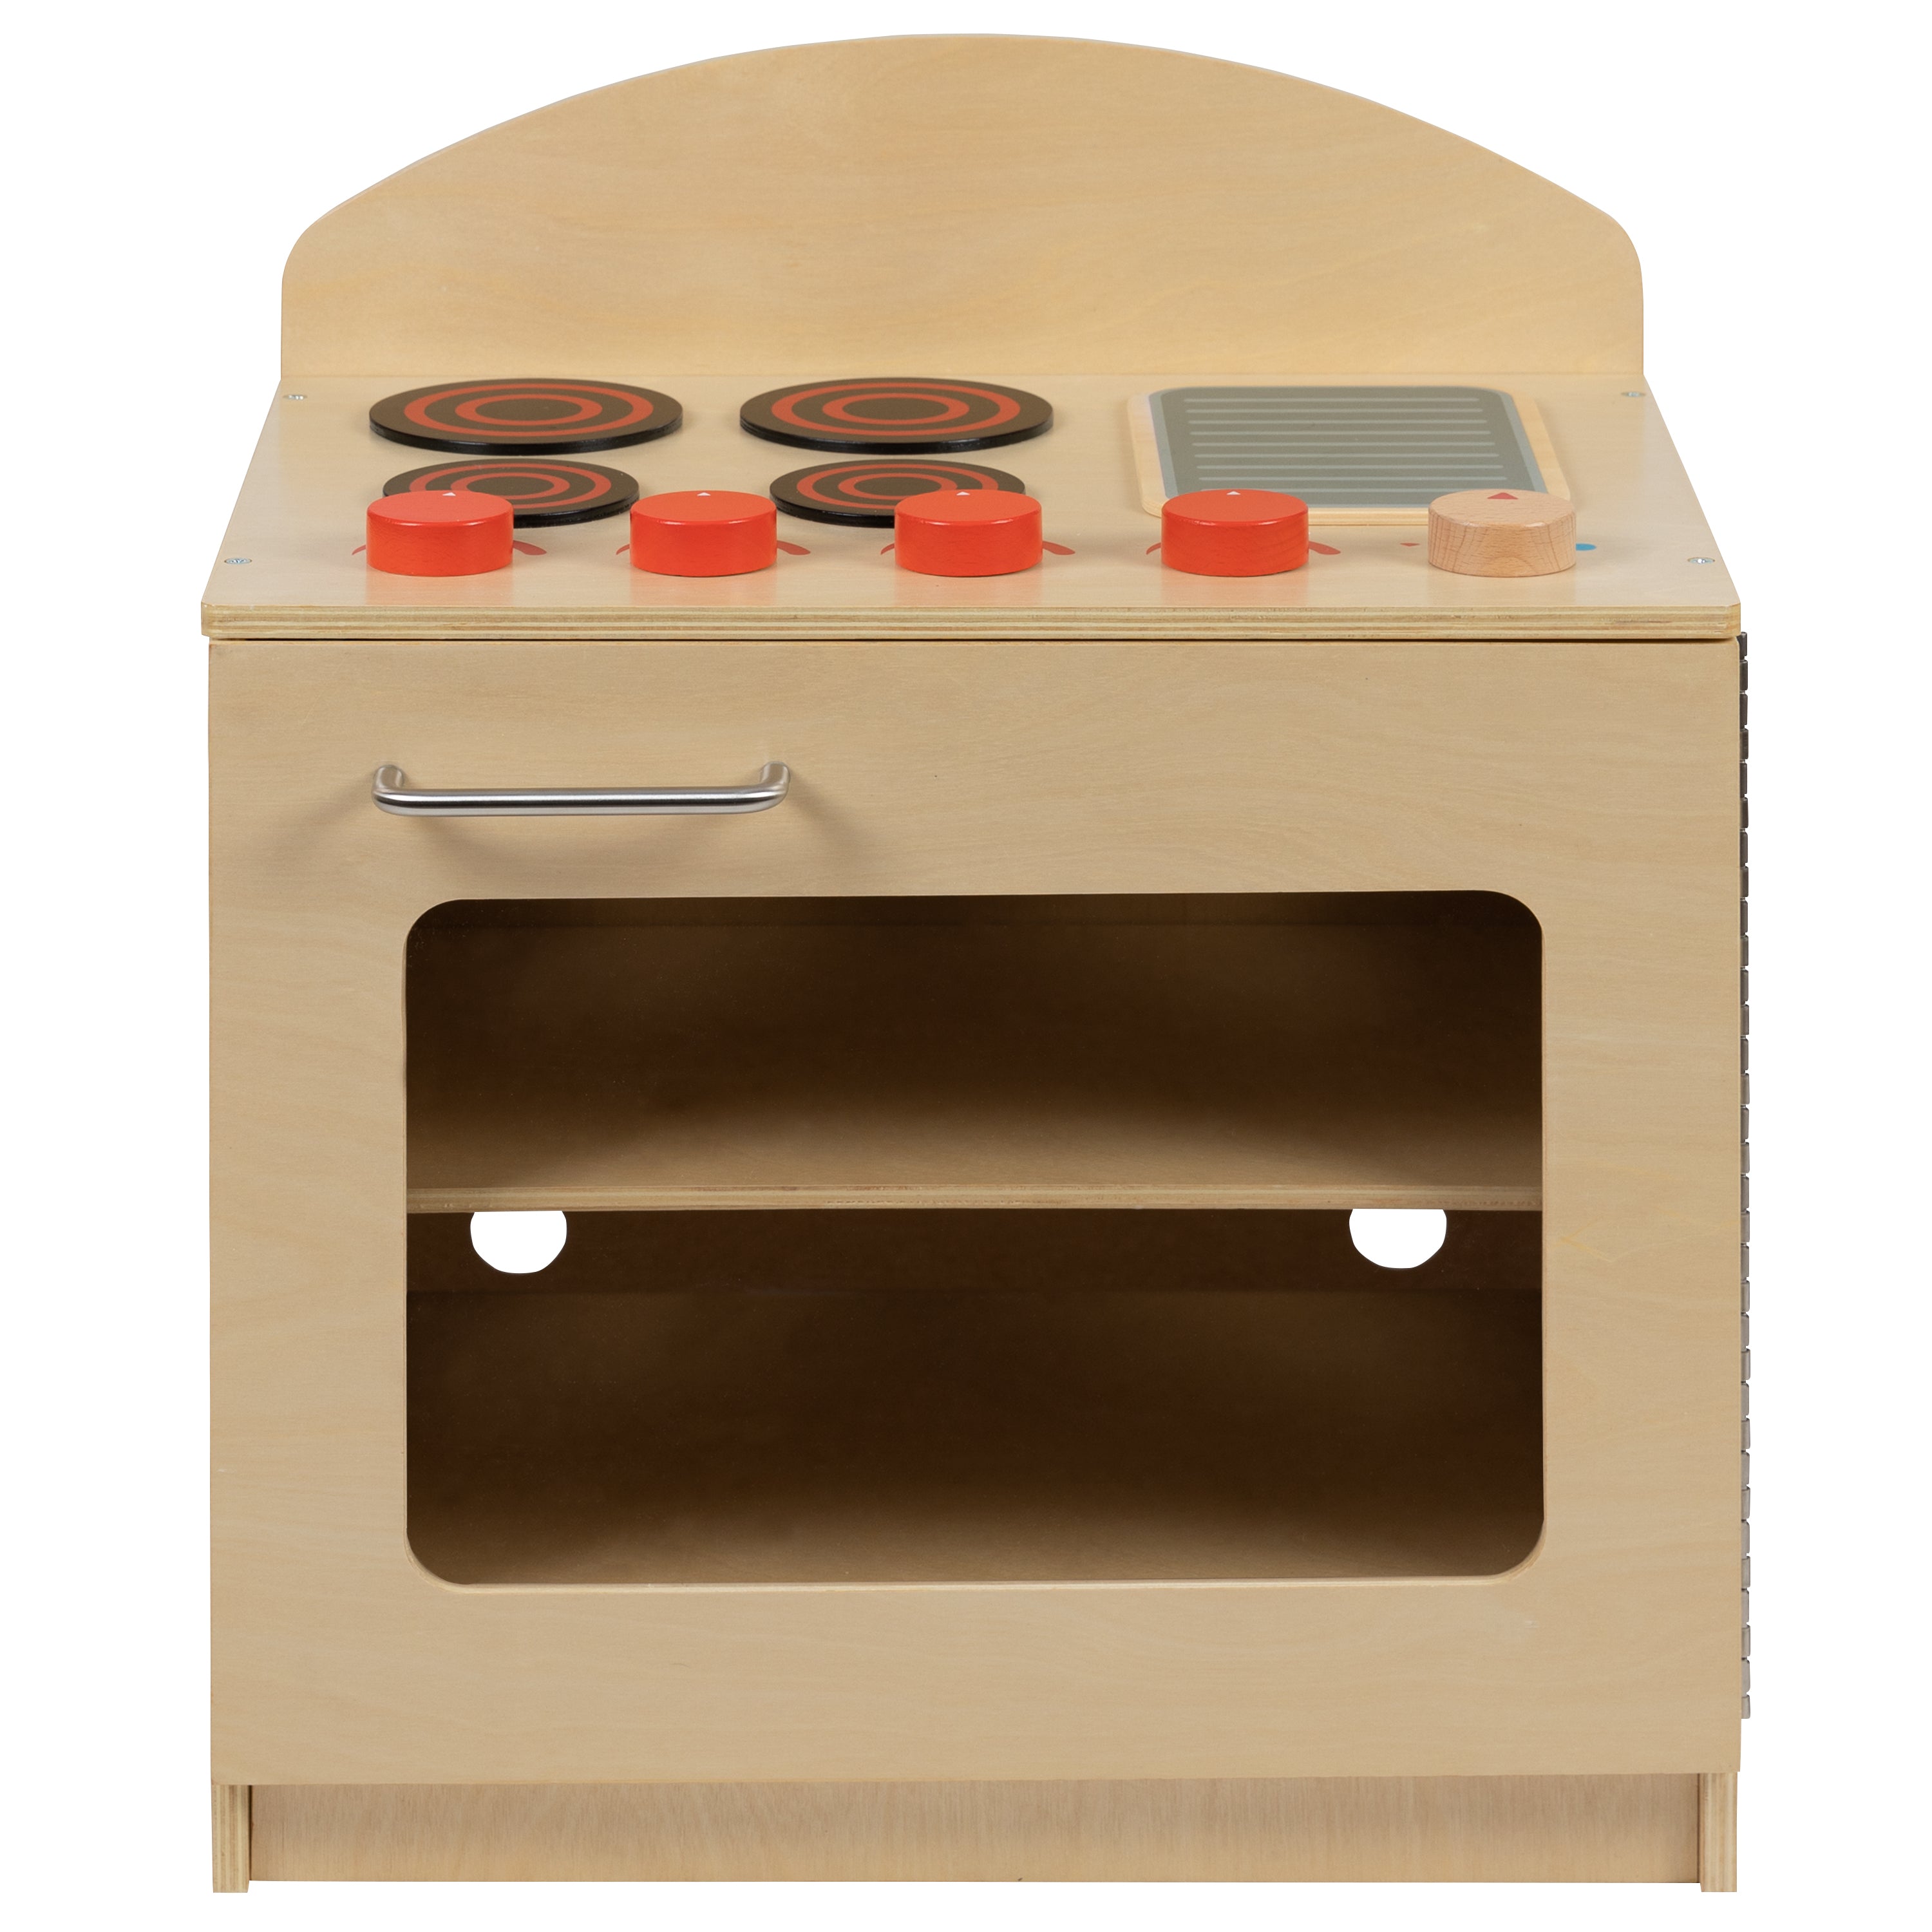 Children's Wooden Kitchen Stove for Commercial or Home Use - Safe, Kid Friendly Design-Dramatic Play-Flash Furniture-Wall2Wall Furnishings